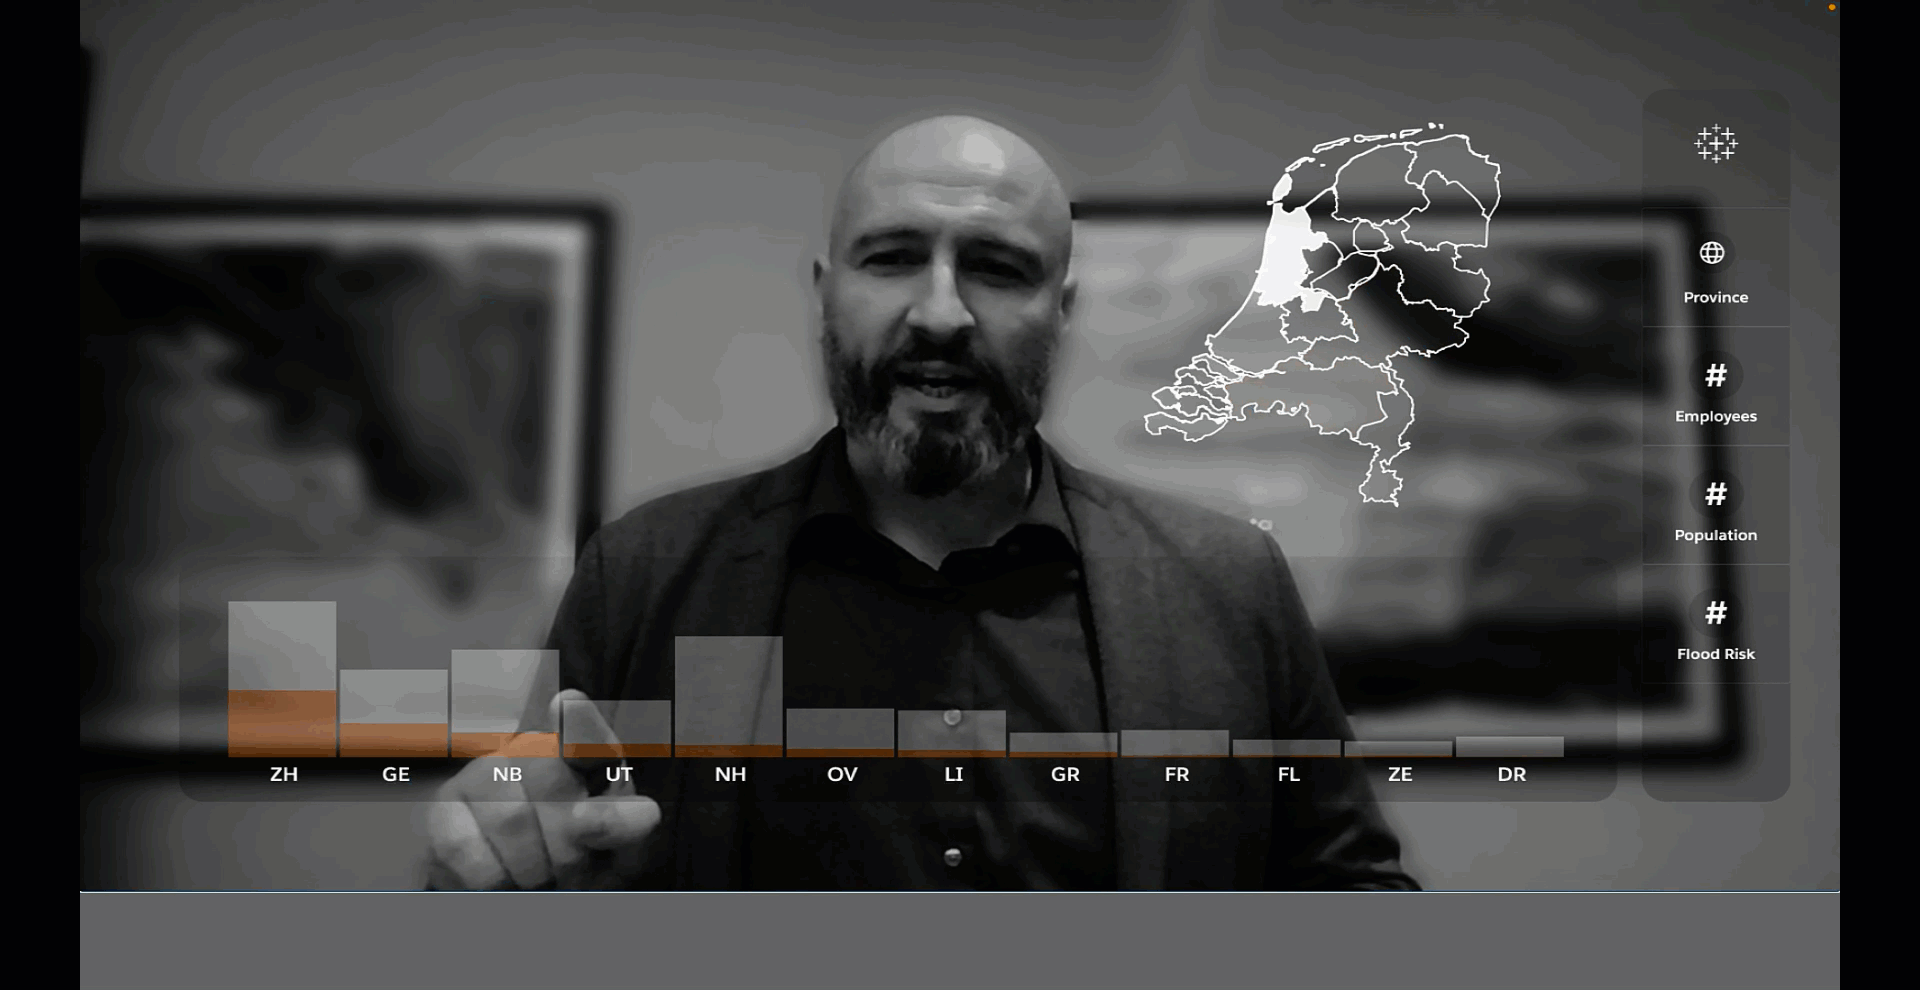 Black and white image of man in dark, buttoned shirt and blazer, pointing at bar charts and map on a screen